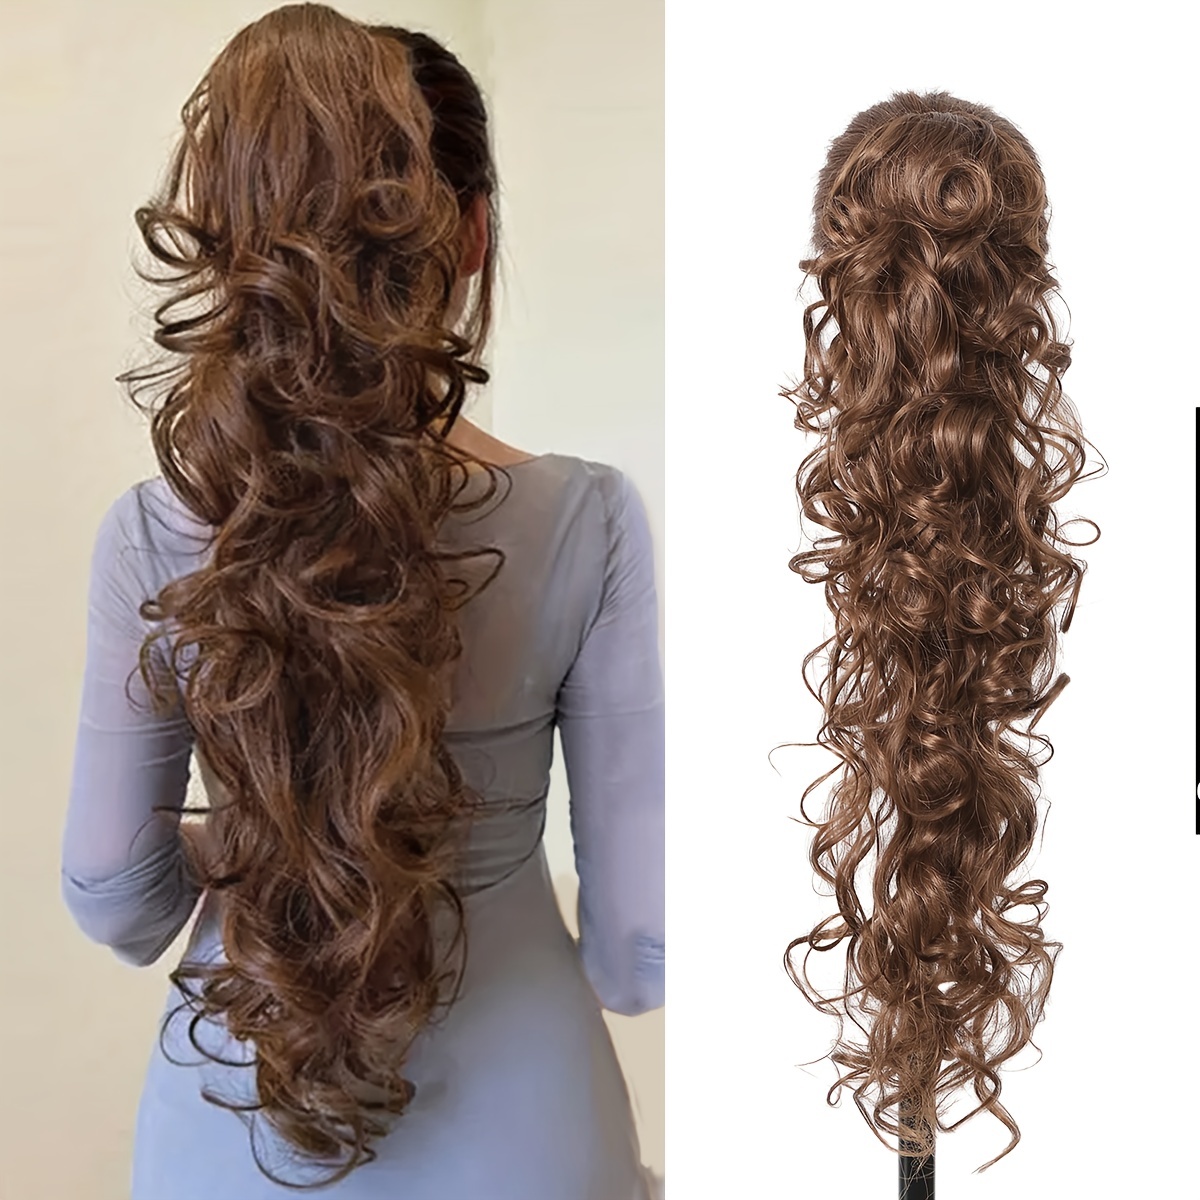 

30-inch-long Brown Deep Curly Wavy Ponytail With Claw Clip In Synthetic Ponytail Extensions For Women Elegantly Beautiful Stylish Ponytail Wig